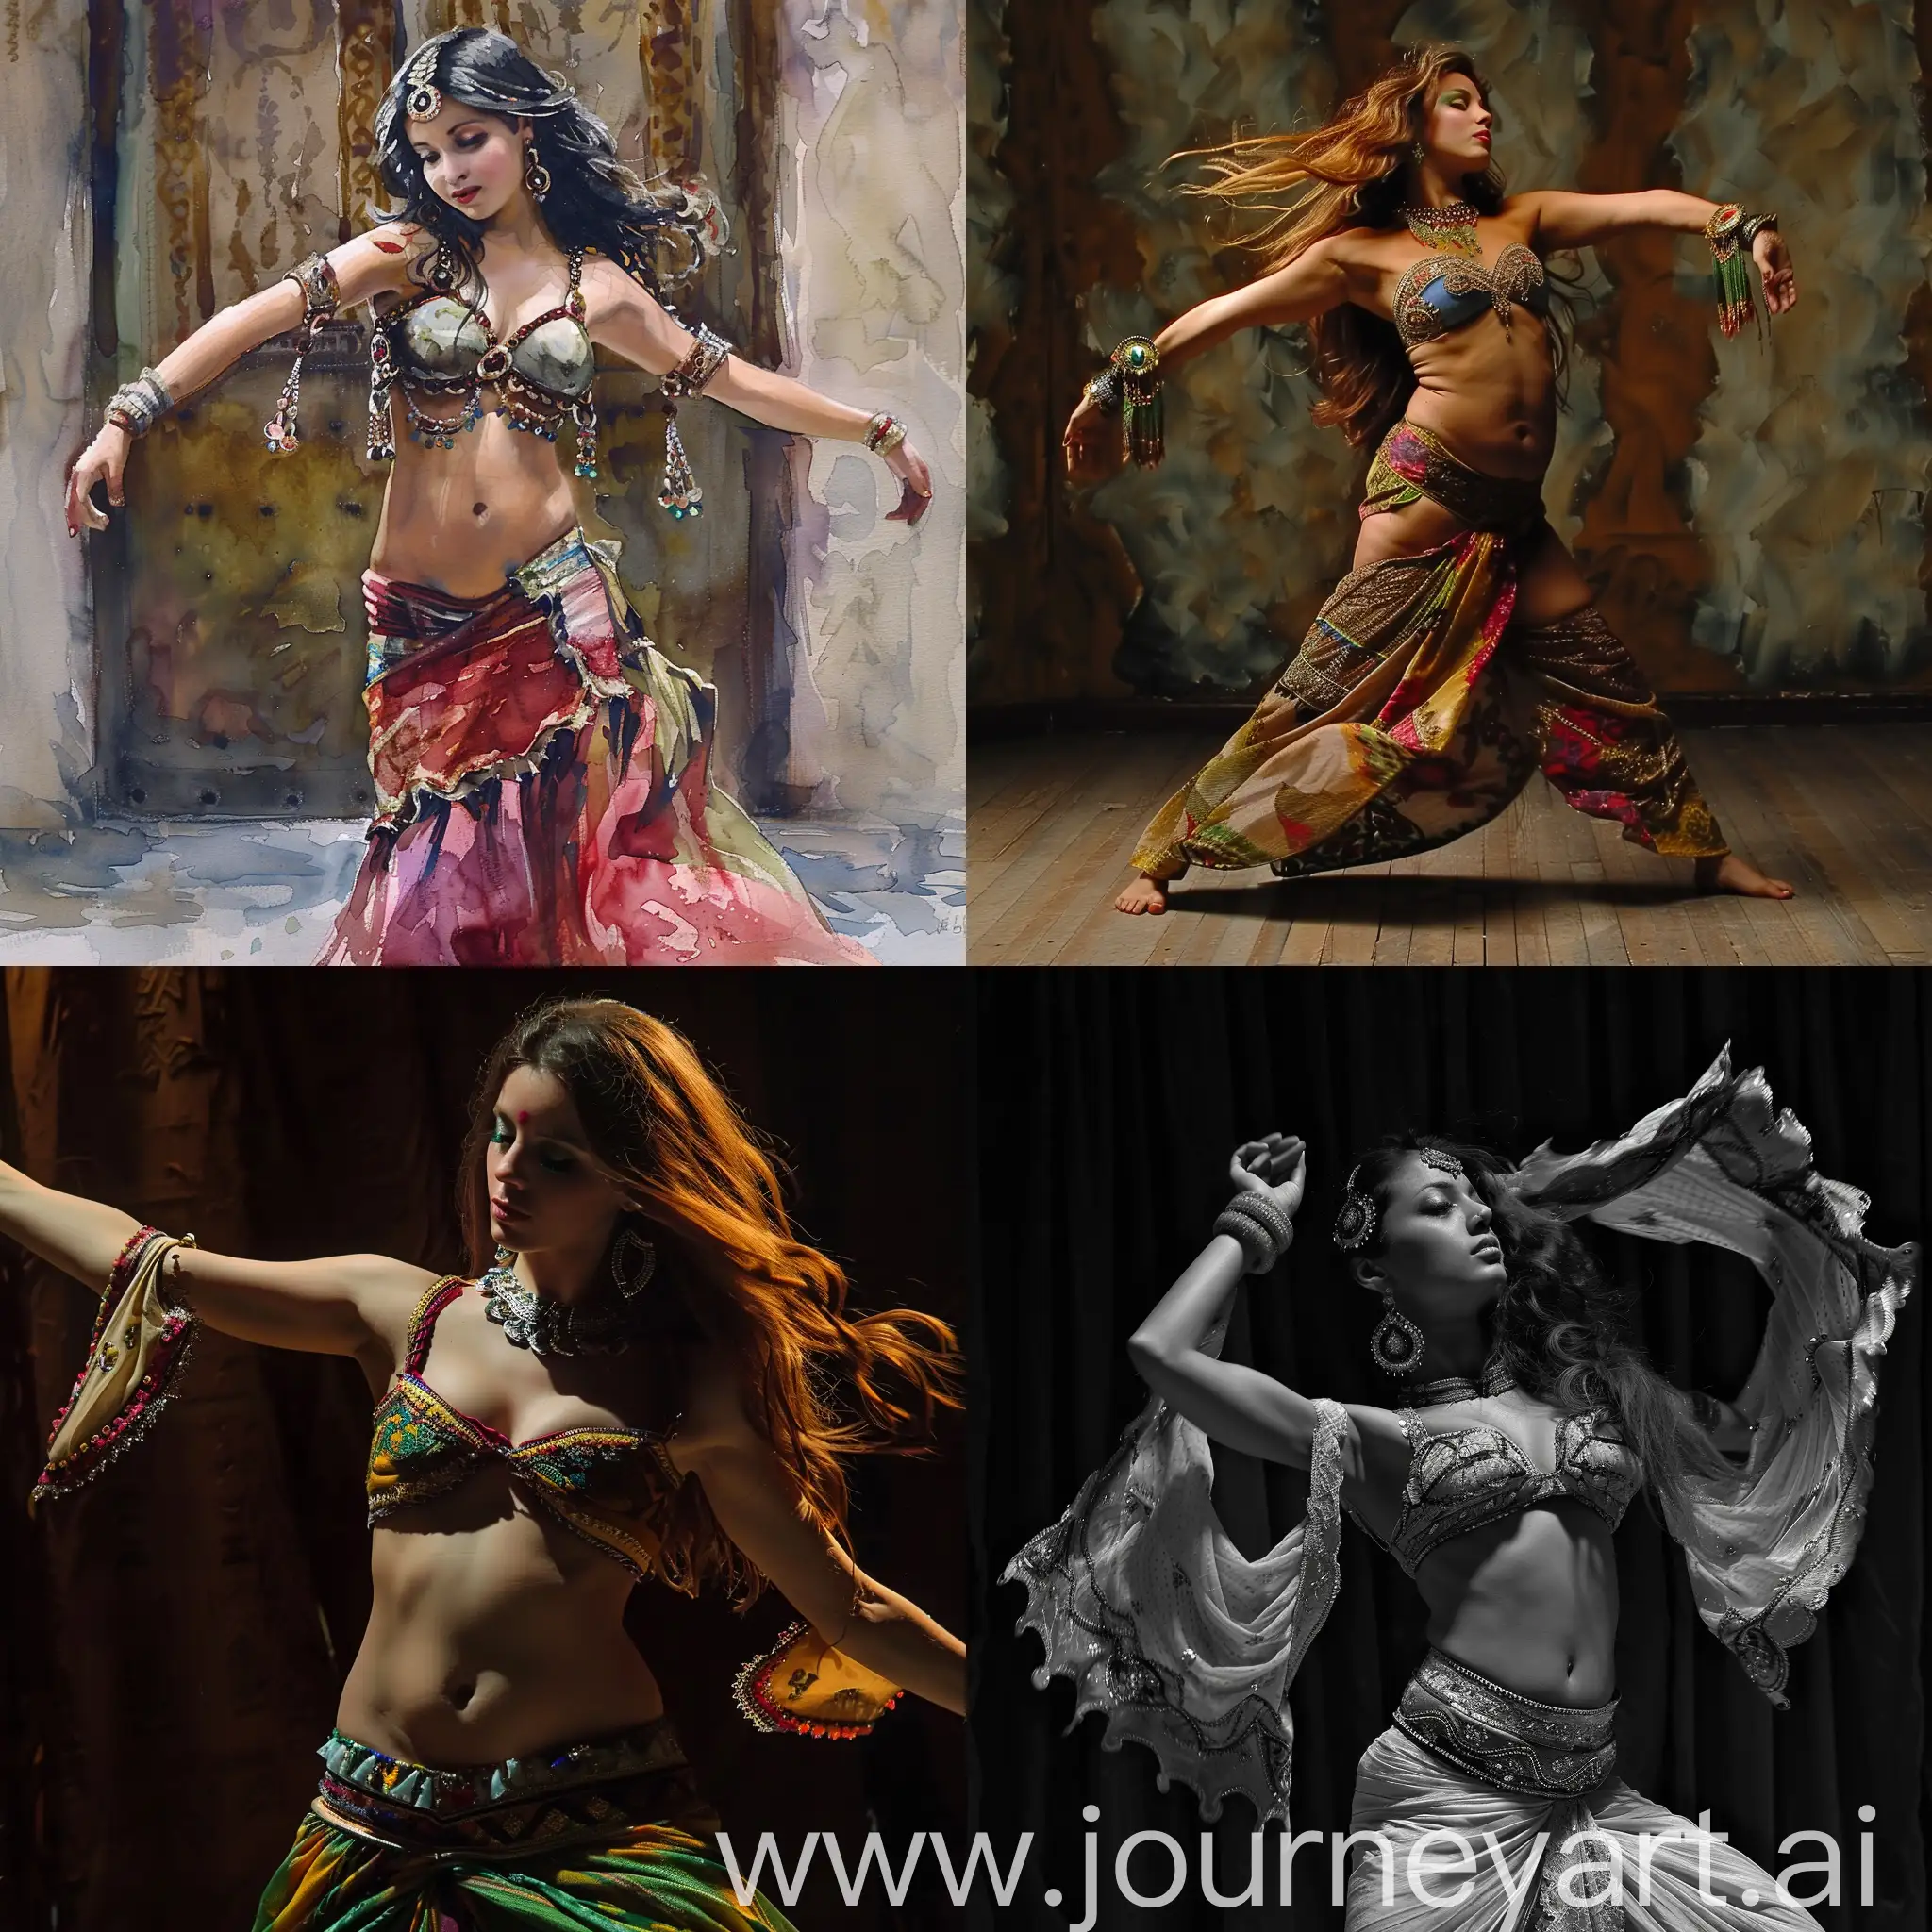 Vibrant-Solo-Belly-Dance-Performance-by-a-Young-Girl